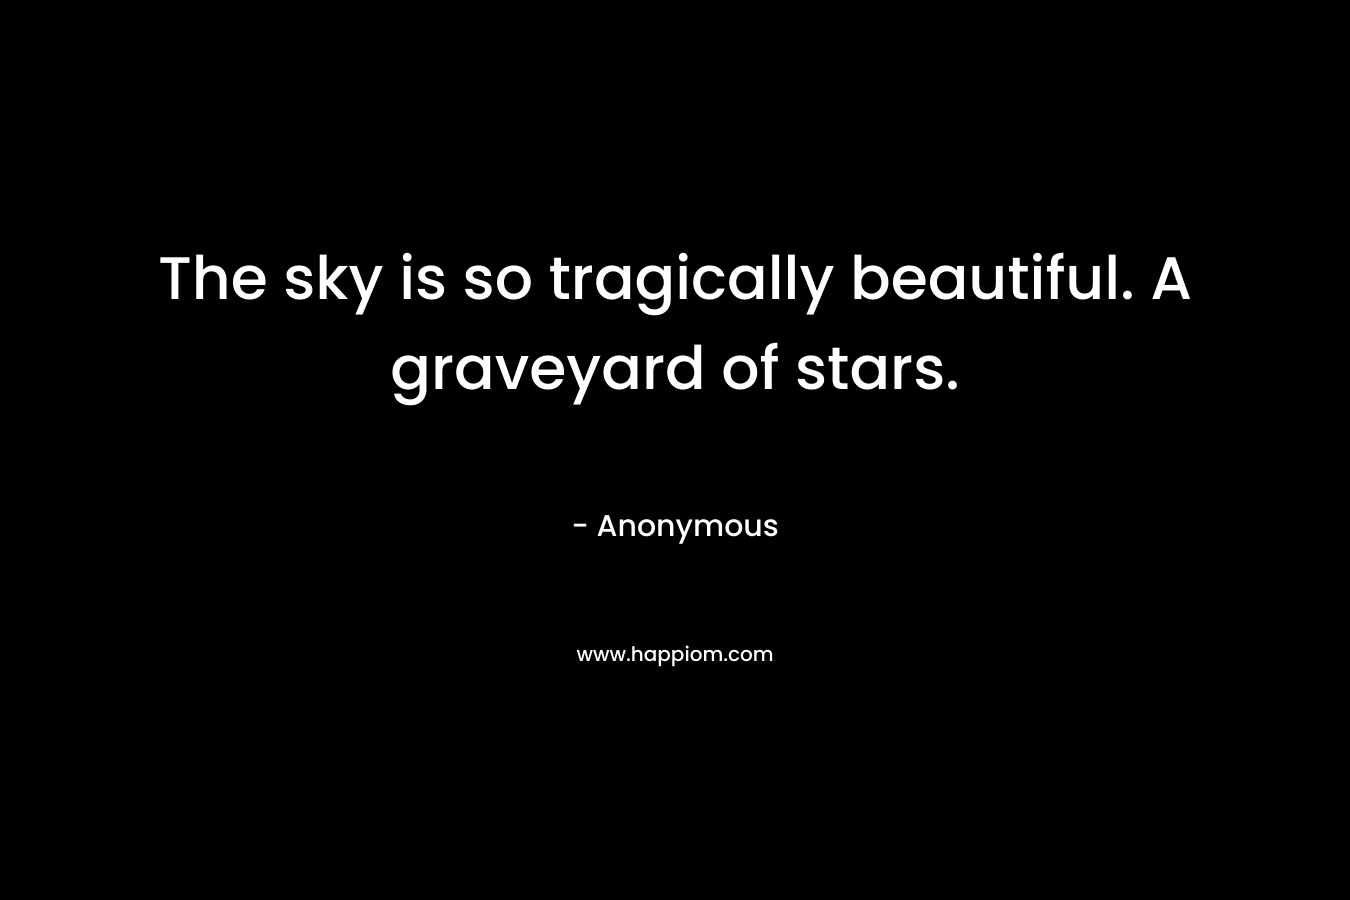 The sky is so tragically beautiful. A graveyard of stars. – Anonymous